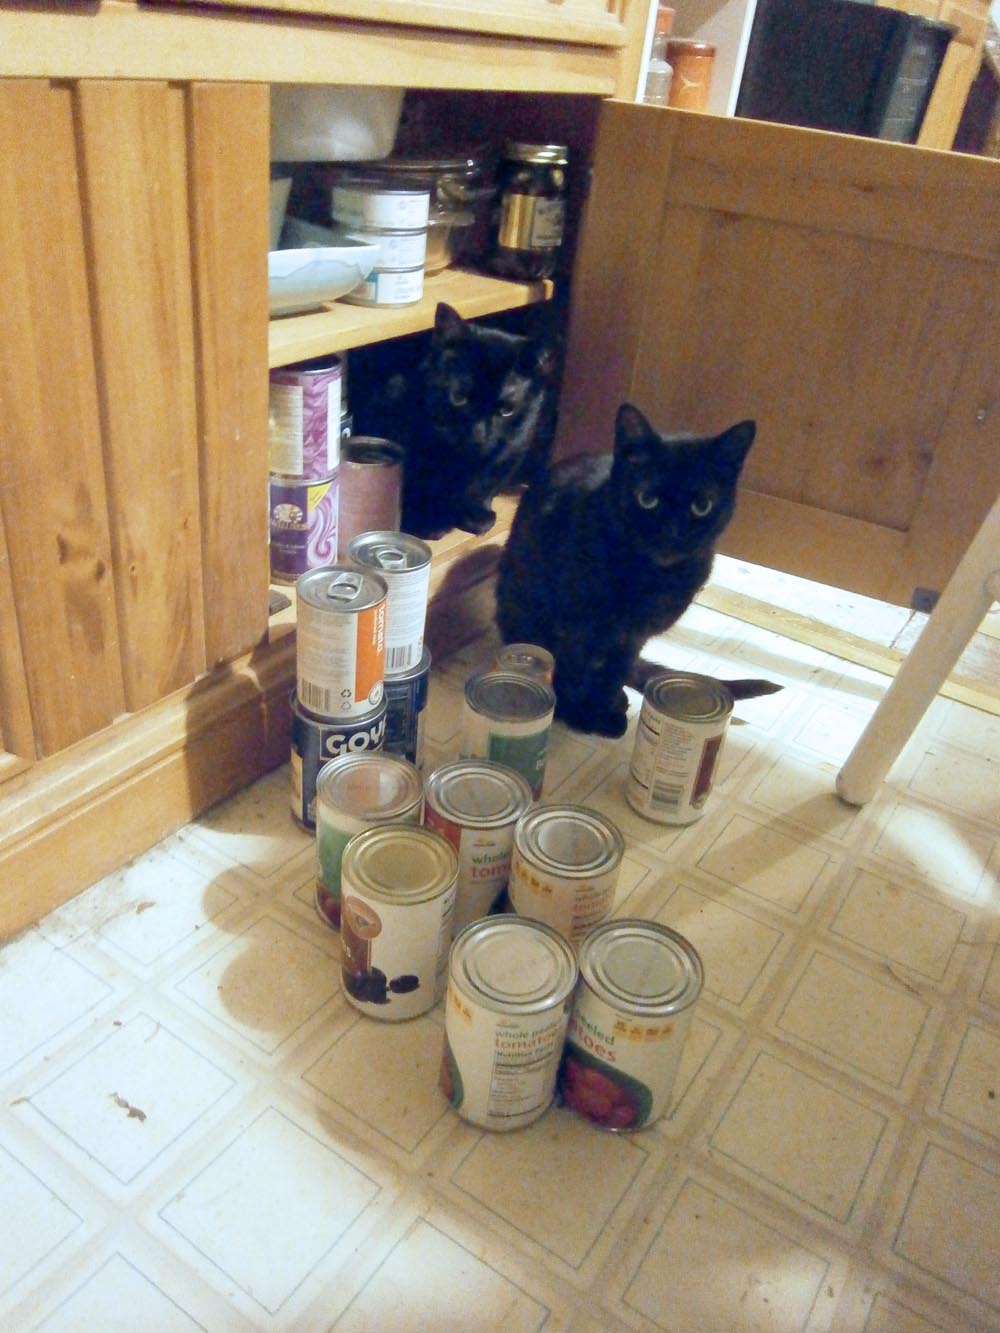 cats and canned goods